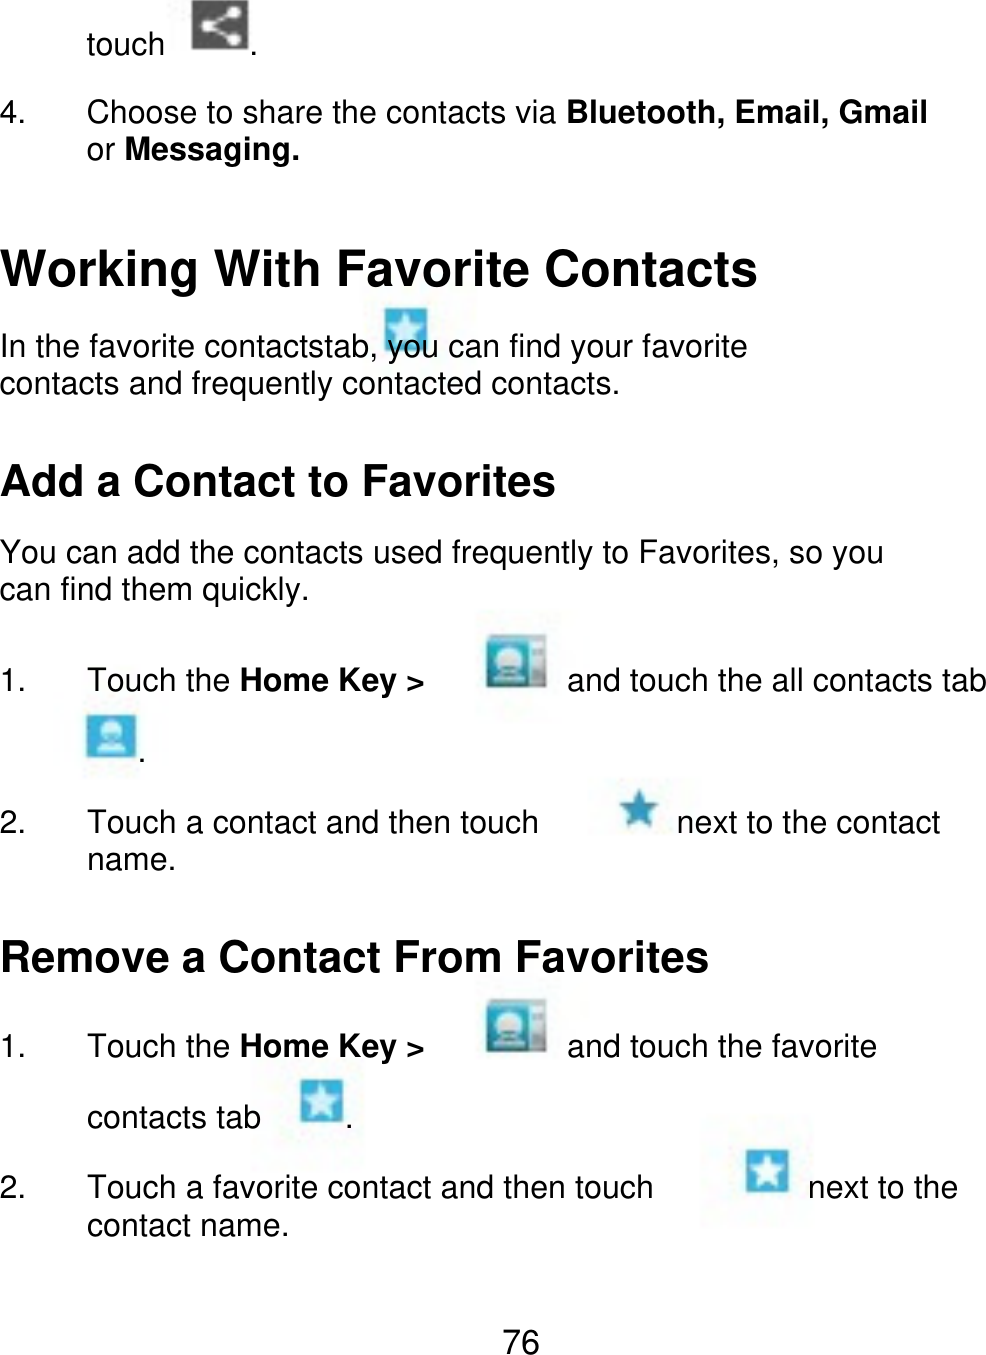 touch 4. . Choose to share the contacts via Bluetooth, Email, Gmail or Messaging. Working With Favorite Contacts In the favorite contactstab, you can find your favorite contacts and frequently contacted contacts. Add a Contact to Favorites You can add the contacts used frequently to Favorites, so you can find them quickly. 1. Touch the Home Key &gt; . 2. Touch a contact and then touch name. next to the contact and touch the all contacts tab Remove a Contact From Favorites 1. Touch the Home Key &gt; contacts tab 2. . next to the and touch the favorite Touch a favorite contact and then touch contact name. 76 